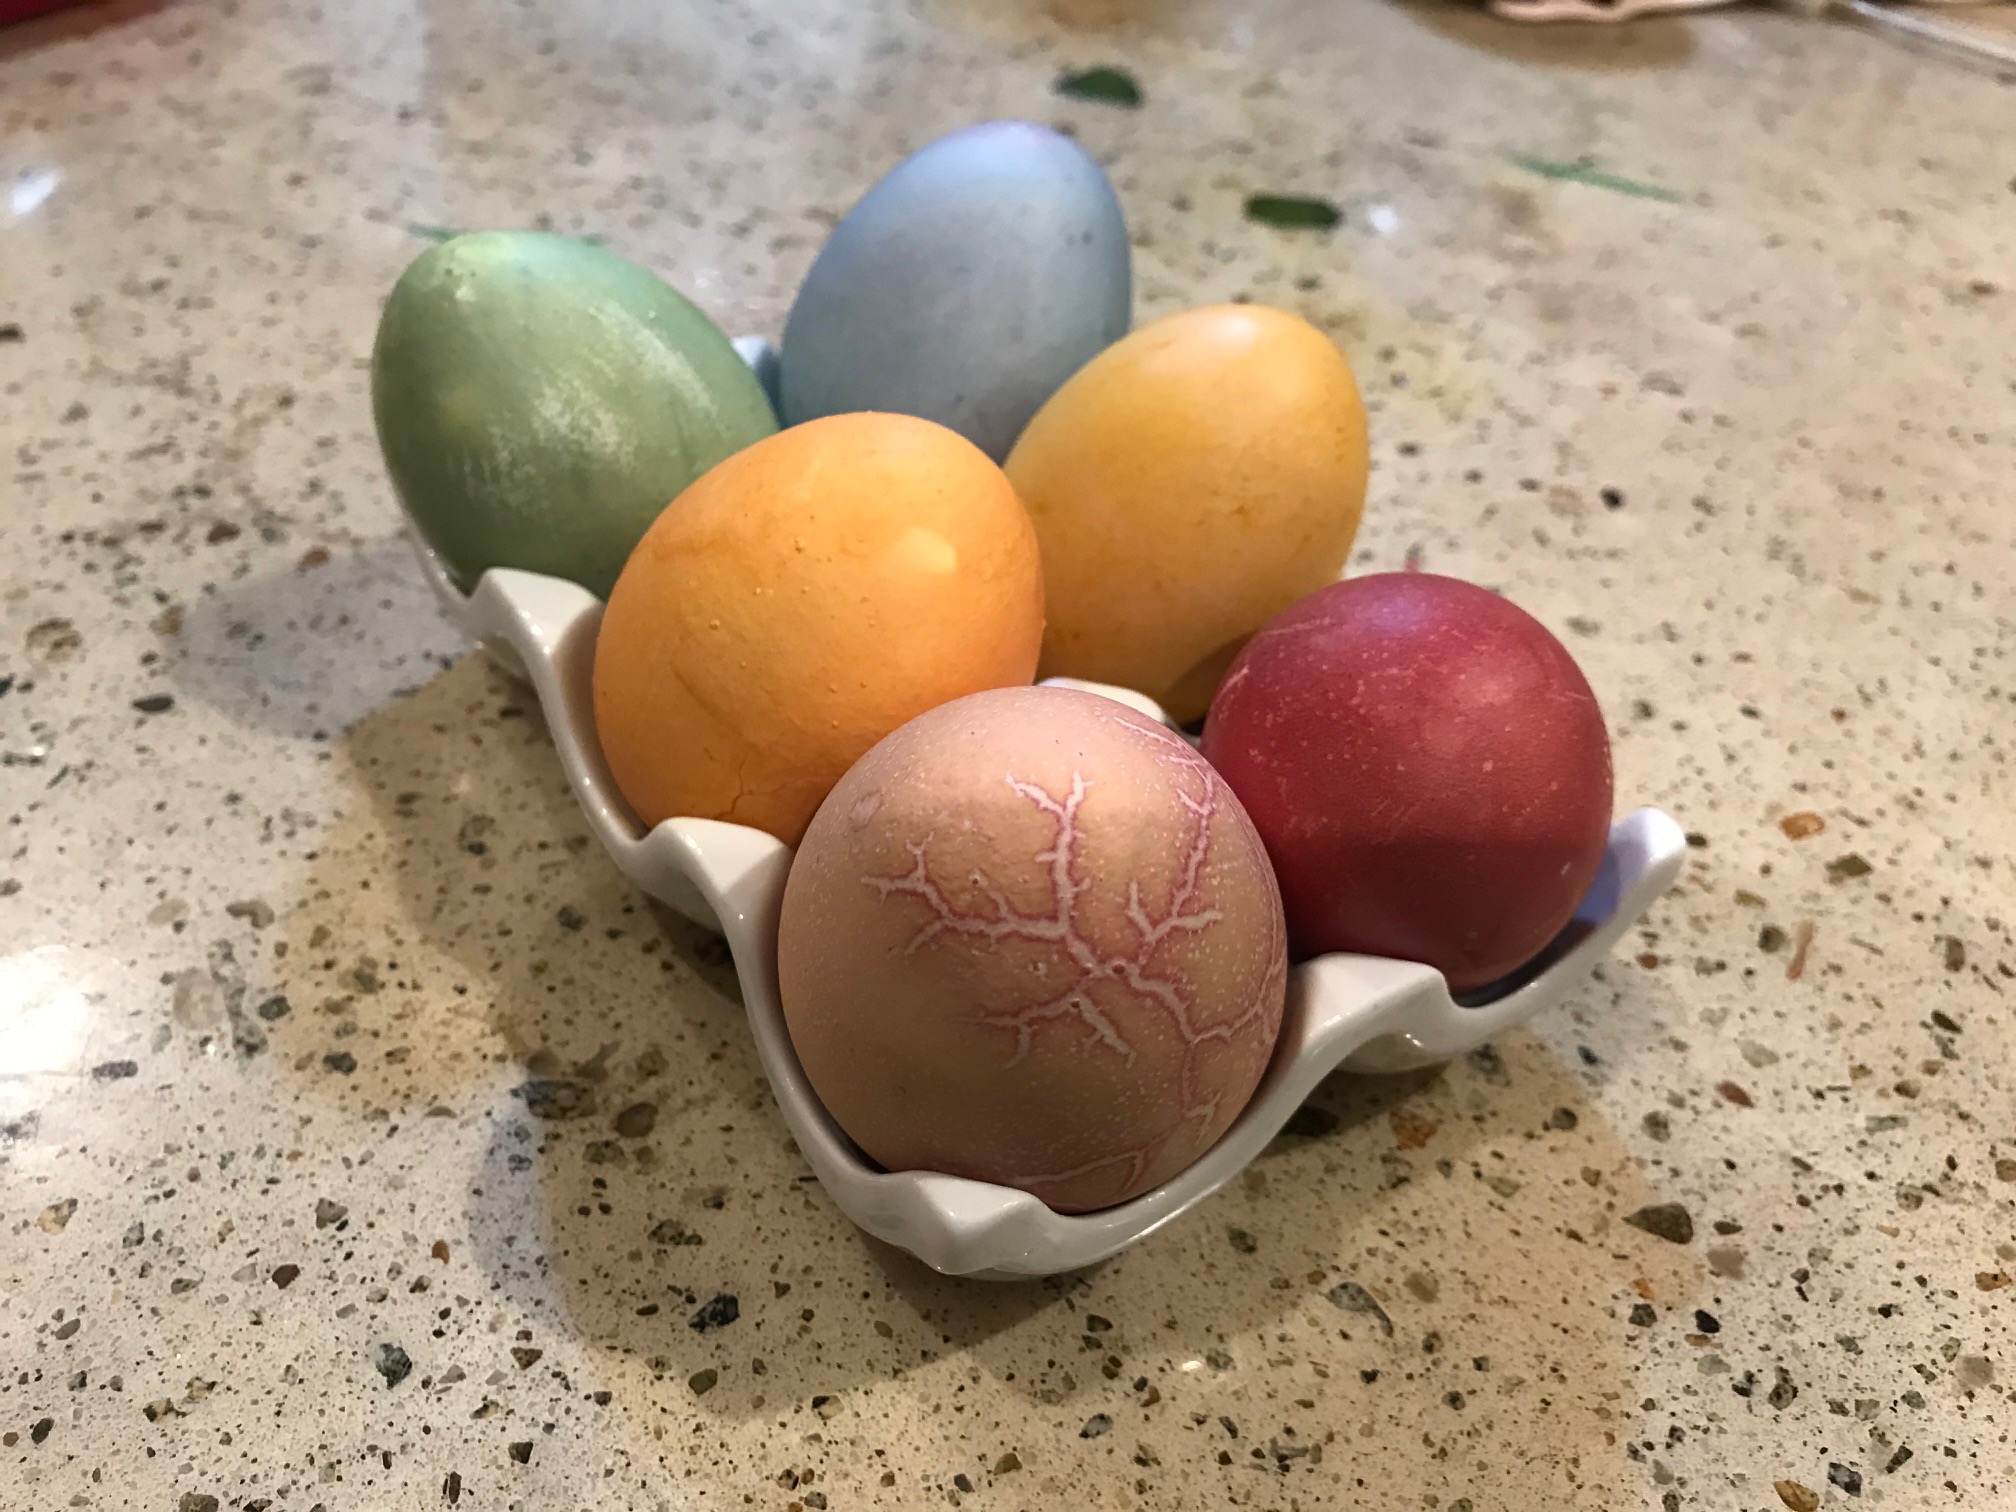 naturally dyed Easter eggs in a ceramic egg holder